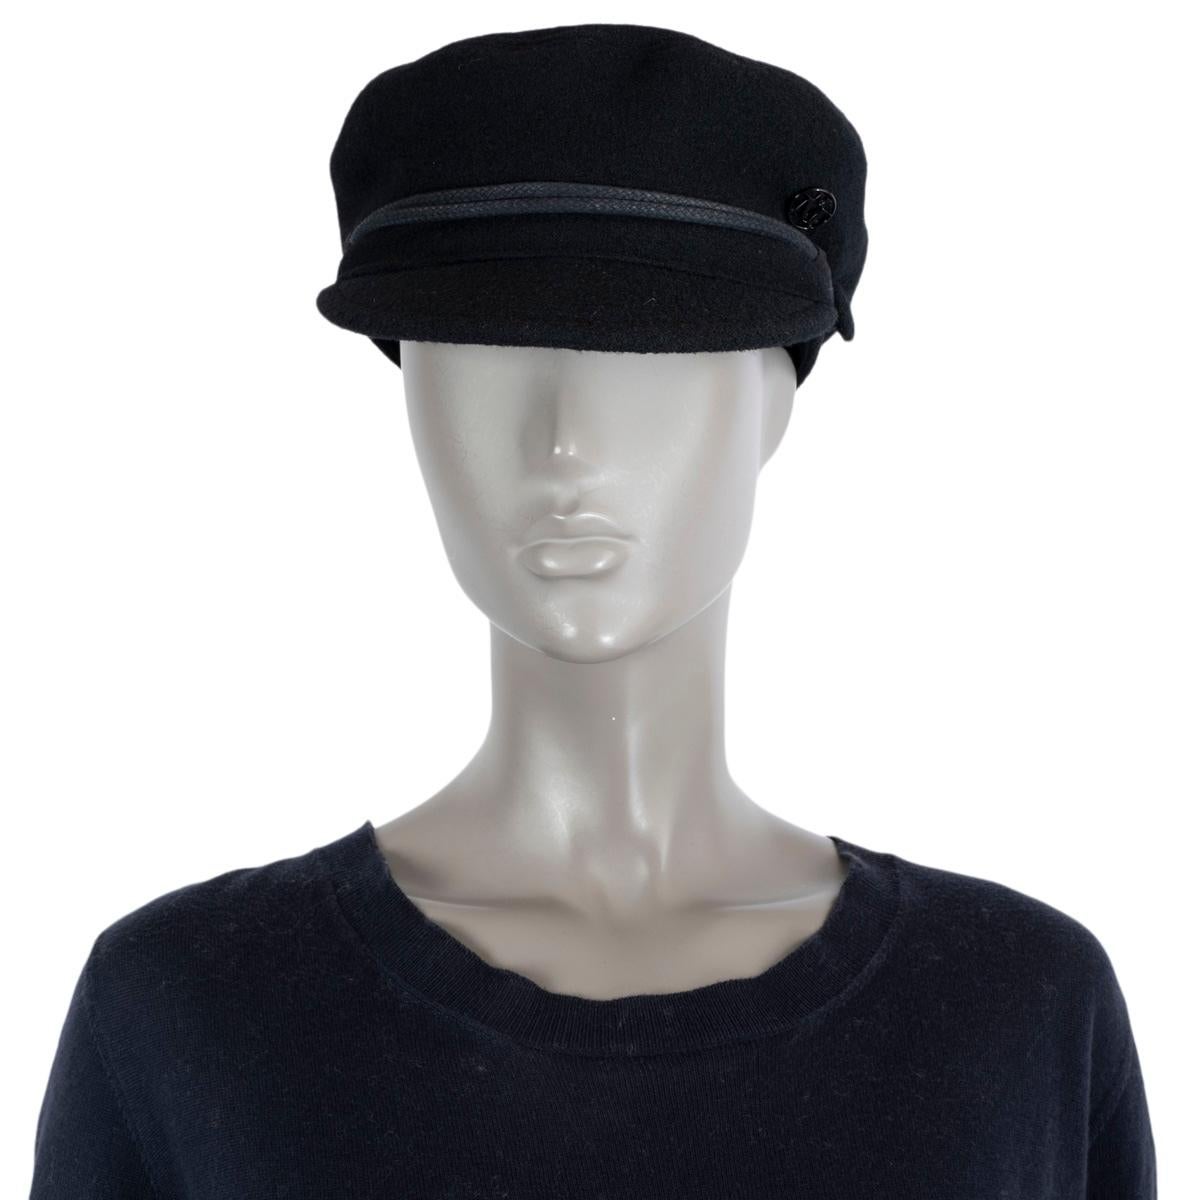 100% authentic Maison Michel New Abby sailor cap in black wool with removable braid. Has been worn and is in excellent condition. 

Measurements
Tag Size	M
Inside Circumference	56cm (21.8in)

All our listings include only the listed item unless